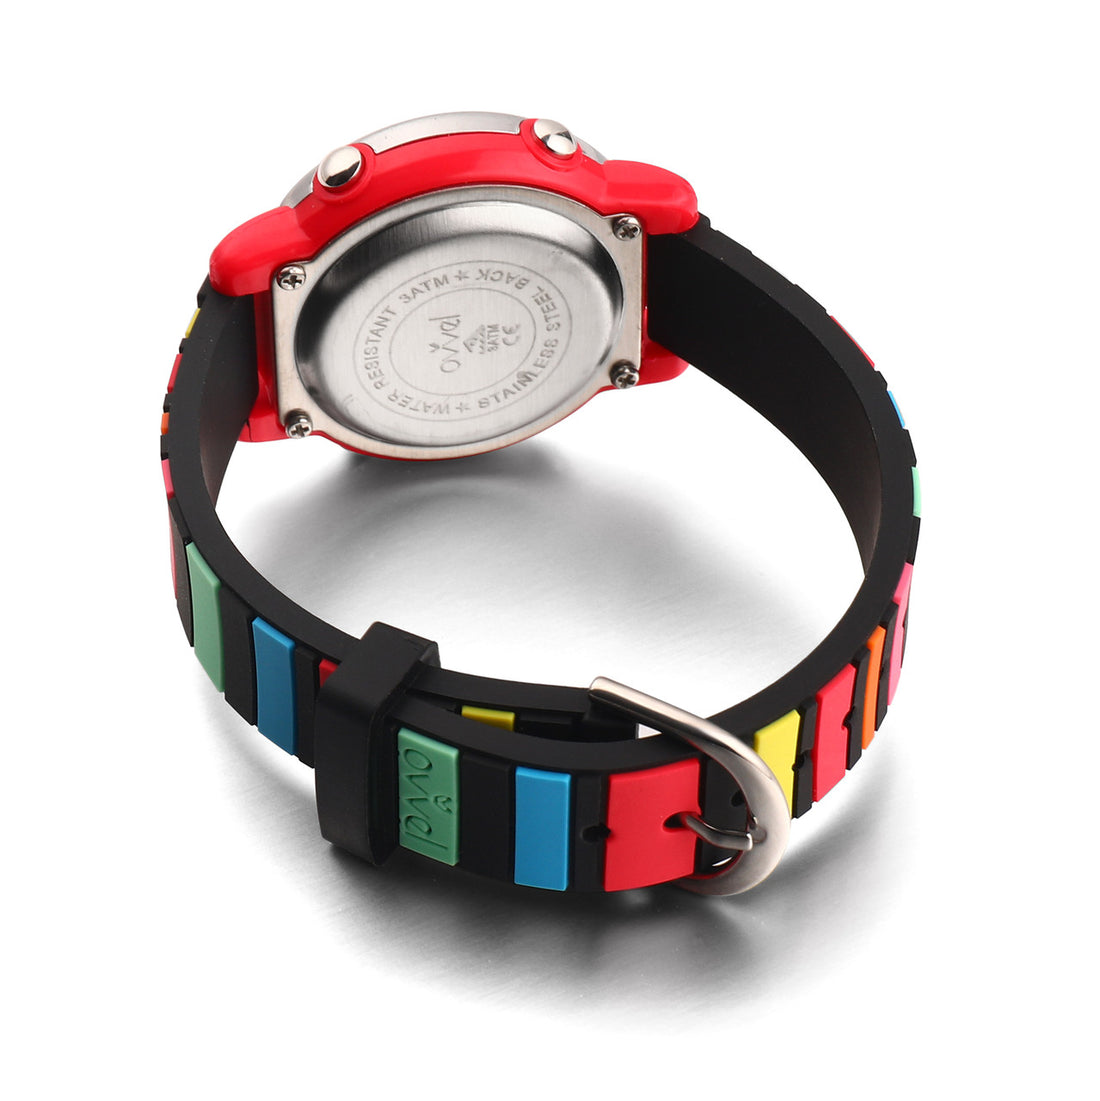 Girls Digital Sports Watch with many features - Stripes